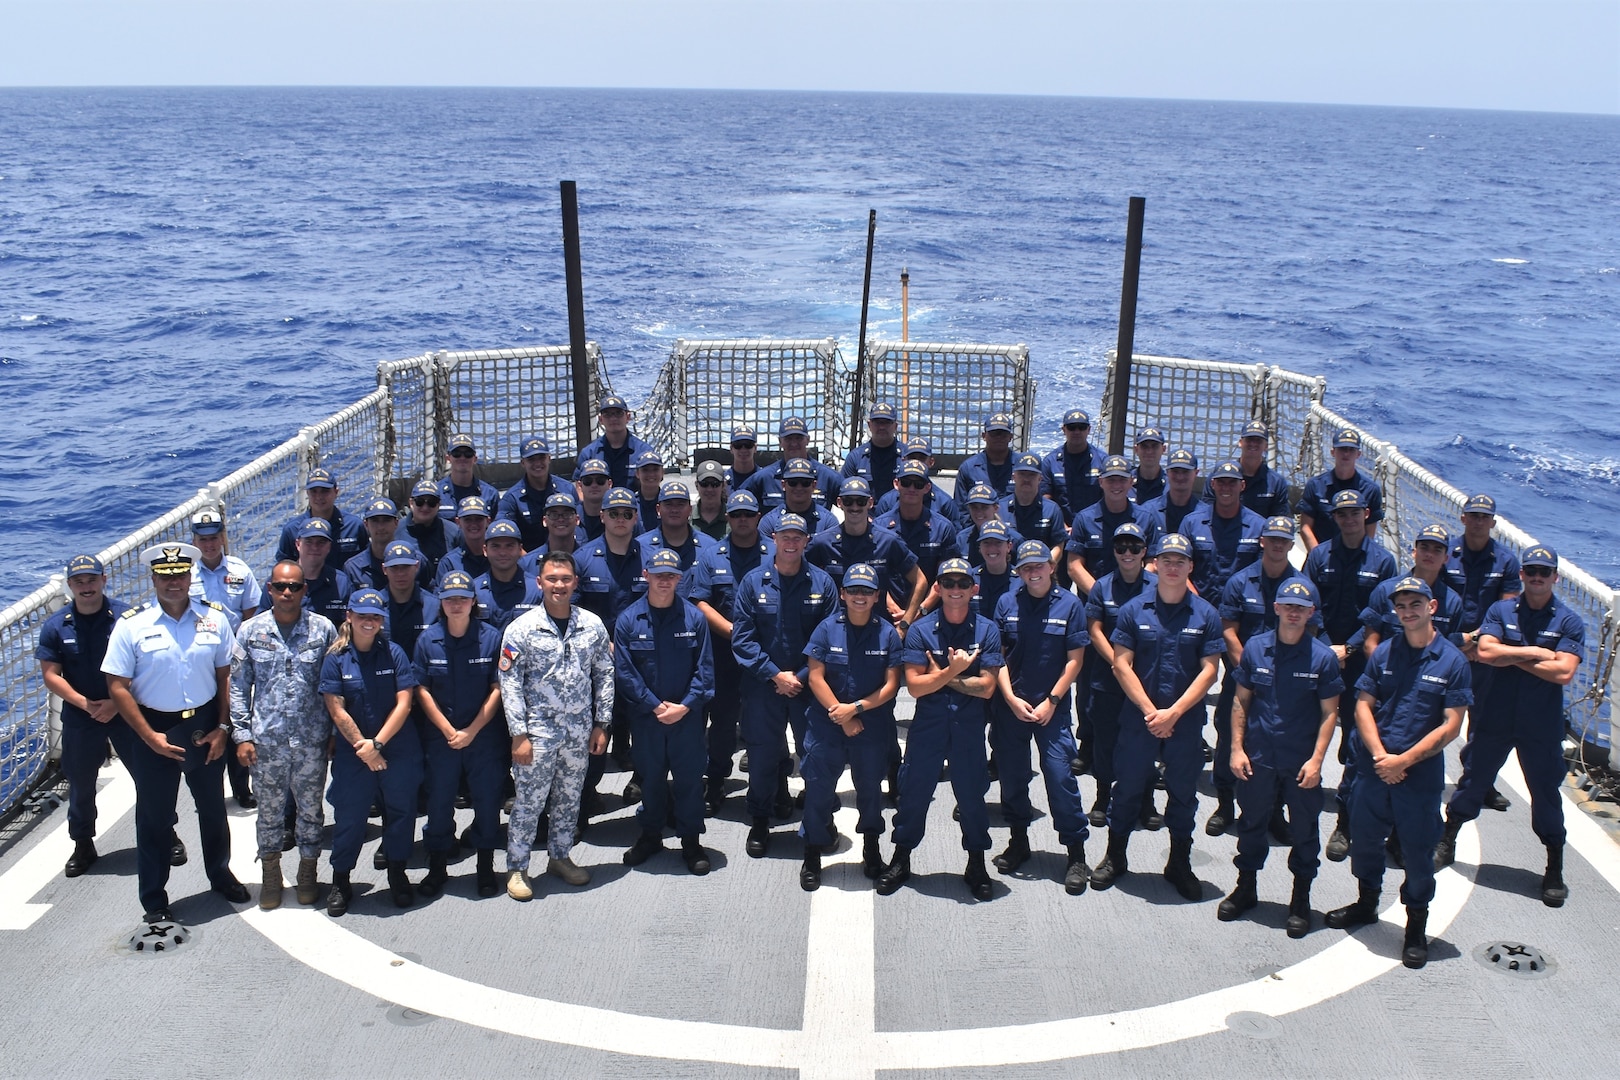 Coast Guardsman assigned to the U.S. Coast Guard Cutter Resolute (WMEC 620) attend a quarters meeting on the flight deck during a patrol in the Windward Passage supporting Operation Vigilant Sentry, July 1, 2023. At quarters, the Resolute introduced newly reported crew members and promoted the unit's Executive Officer, Cmdr. Mario Gil, to the rank of Commander. (U.S. Coast Guard photo by Petty Officer 1st Class David Deal)